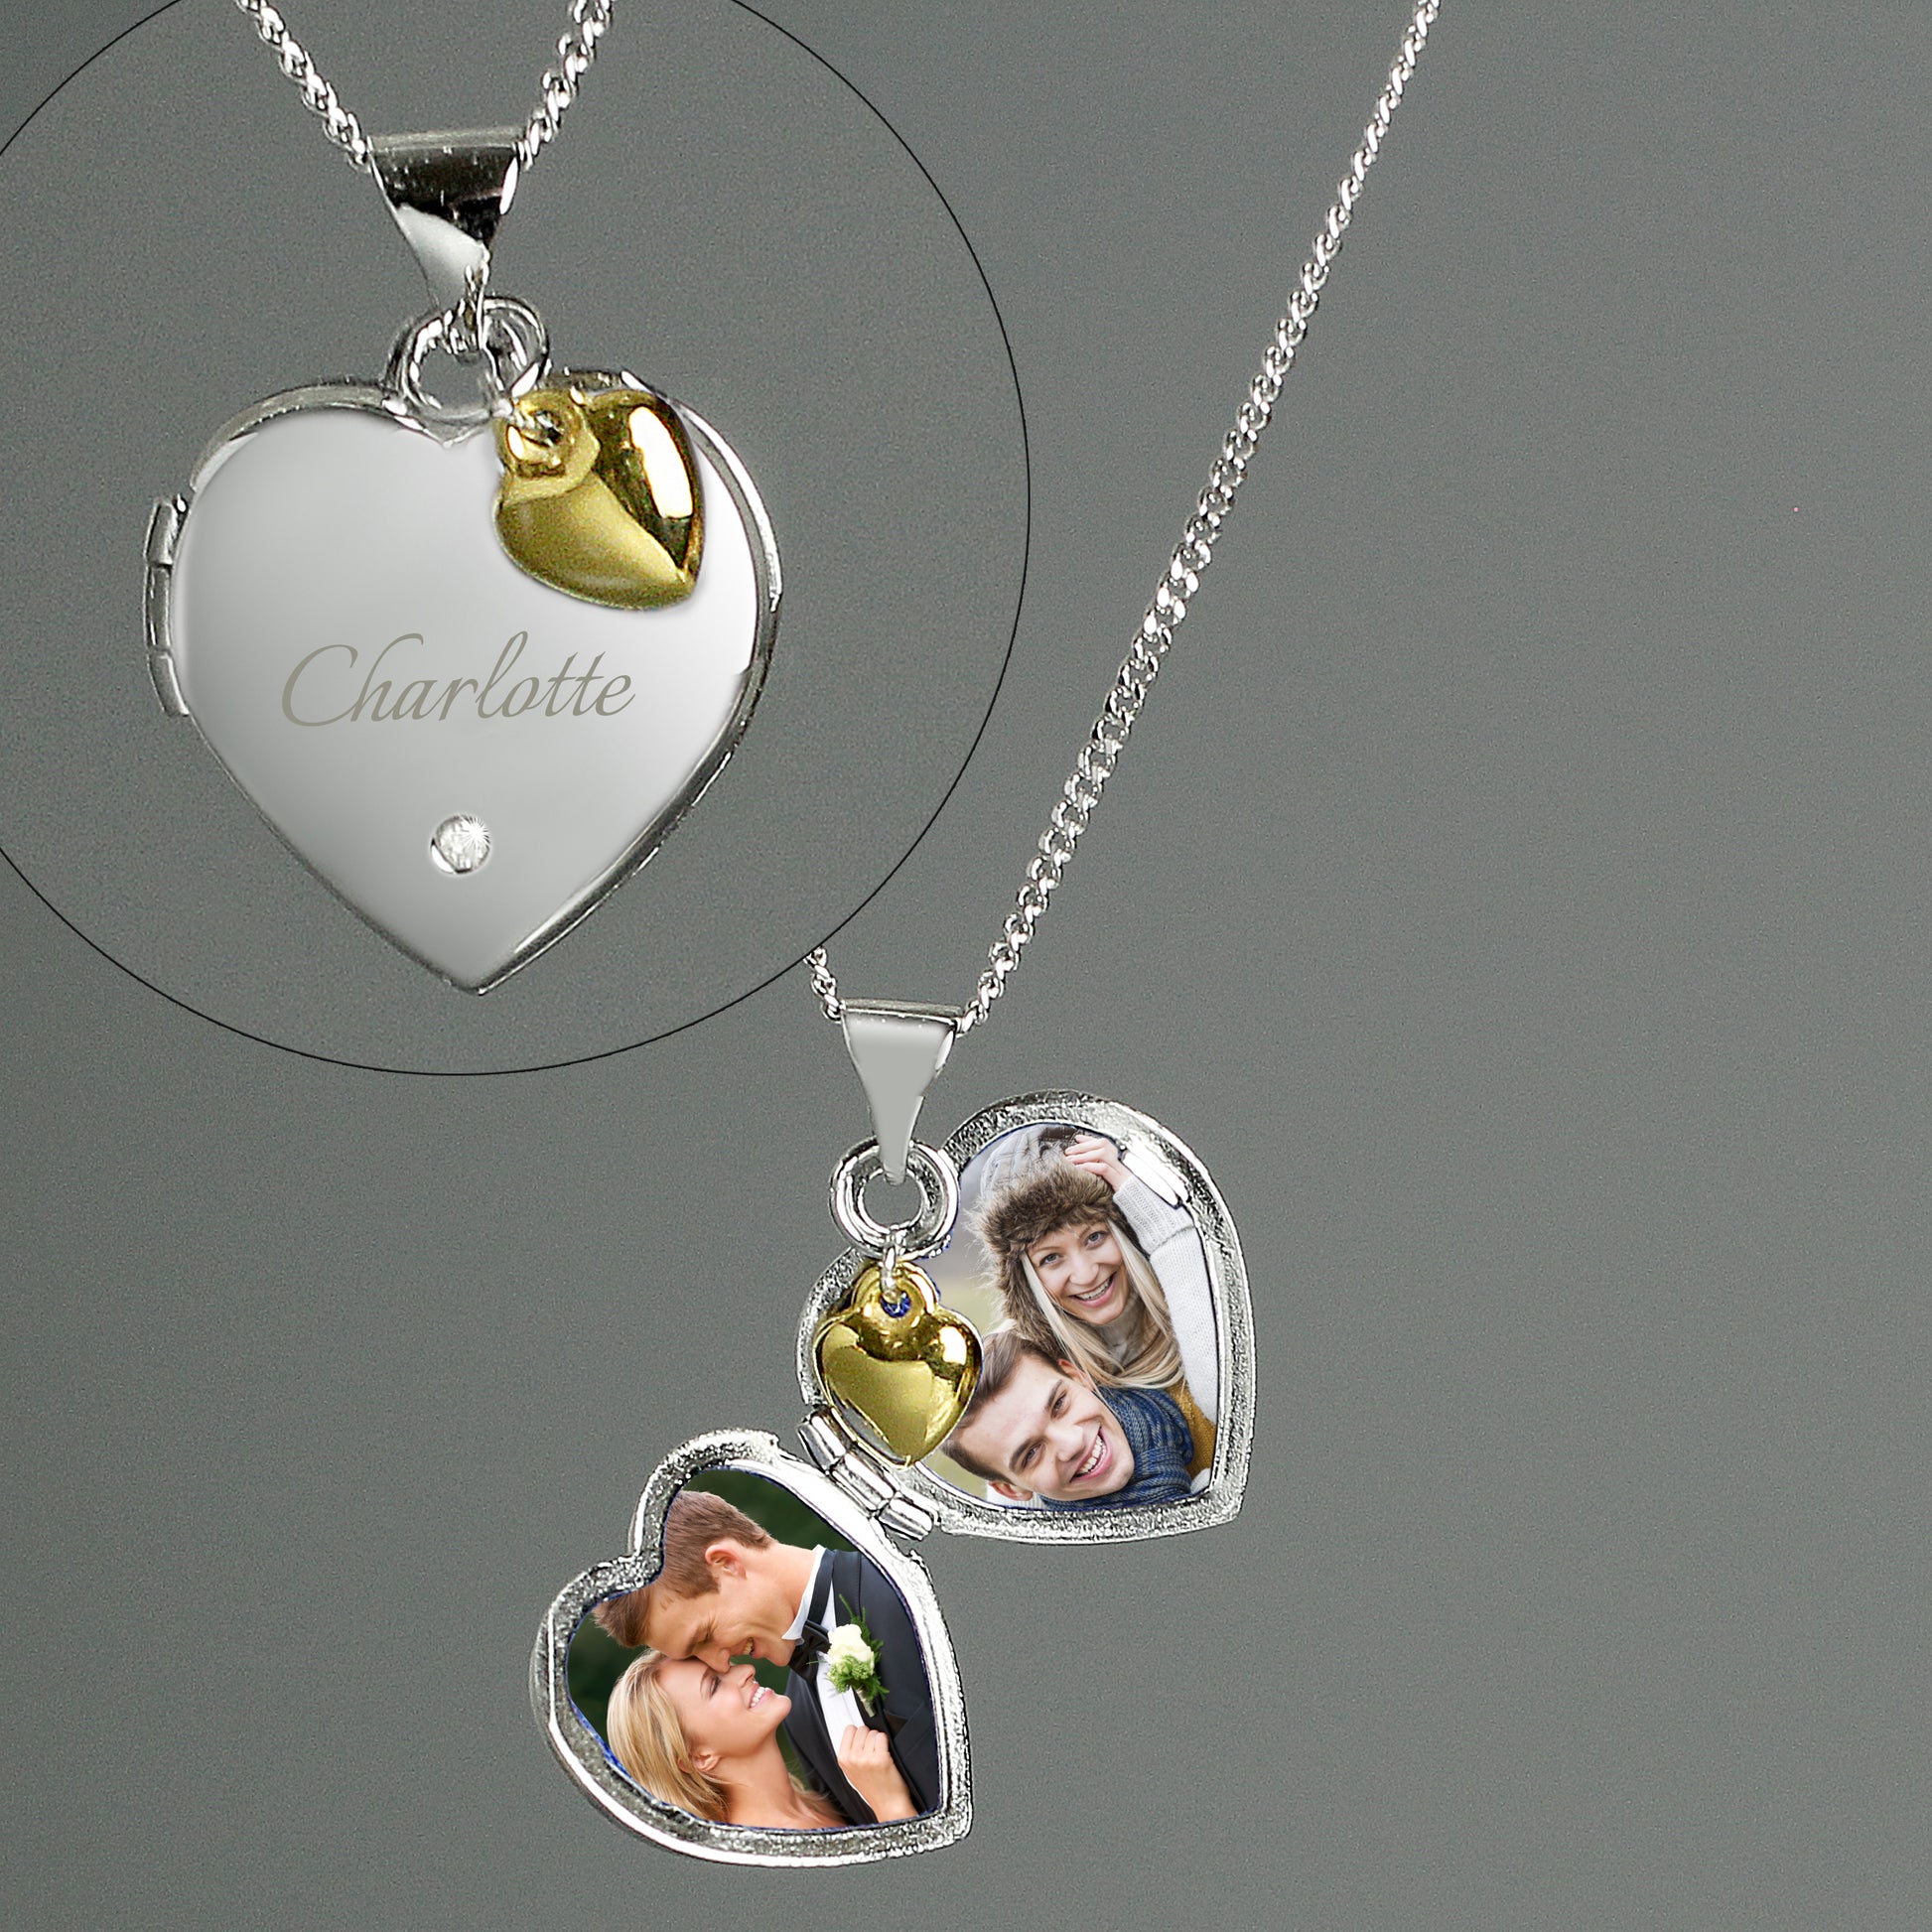 Personalised Sterling Silver Heart Locket Necklace Diamond 9ct Gold Charm